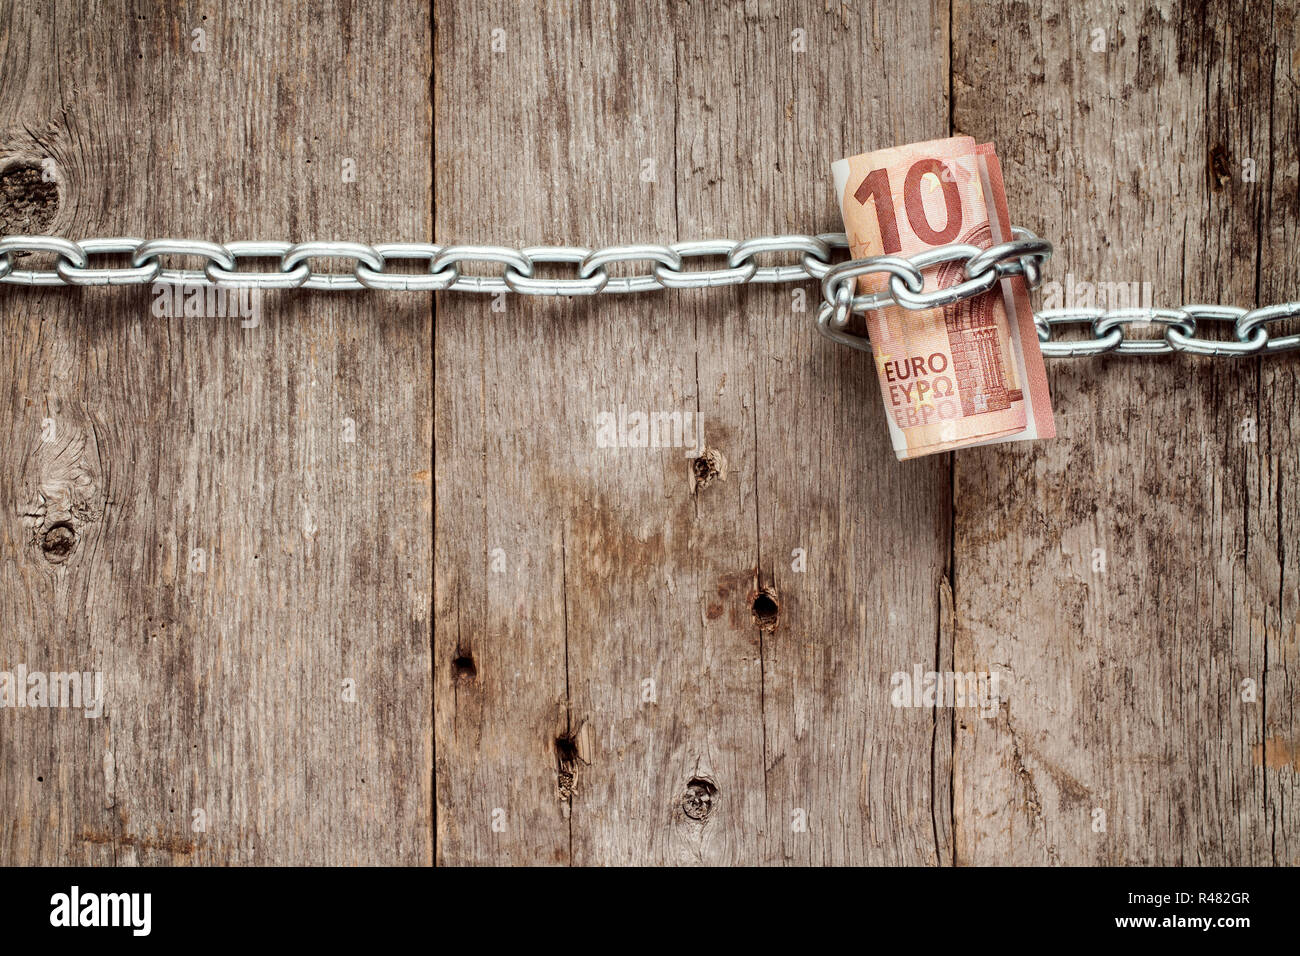 Rolled up Ten euro bills in chains Stock Photo